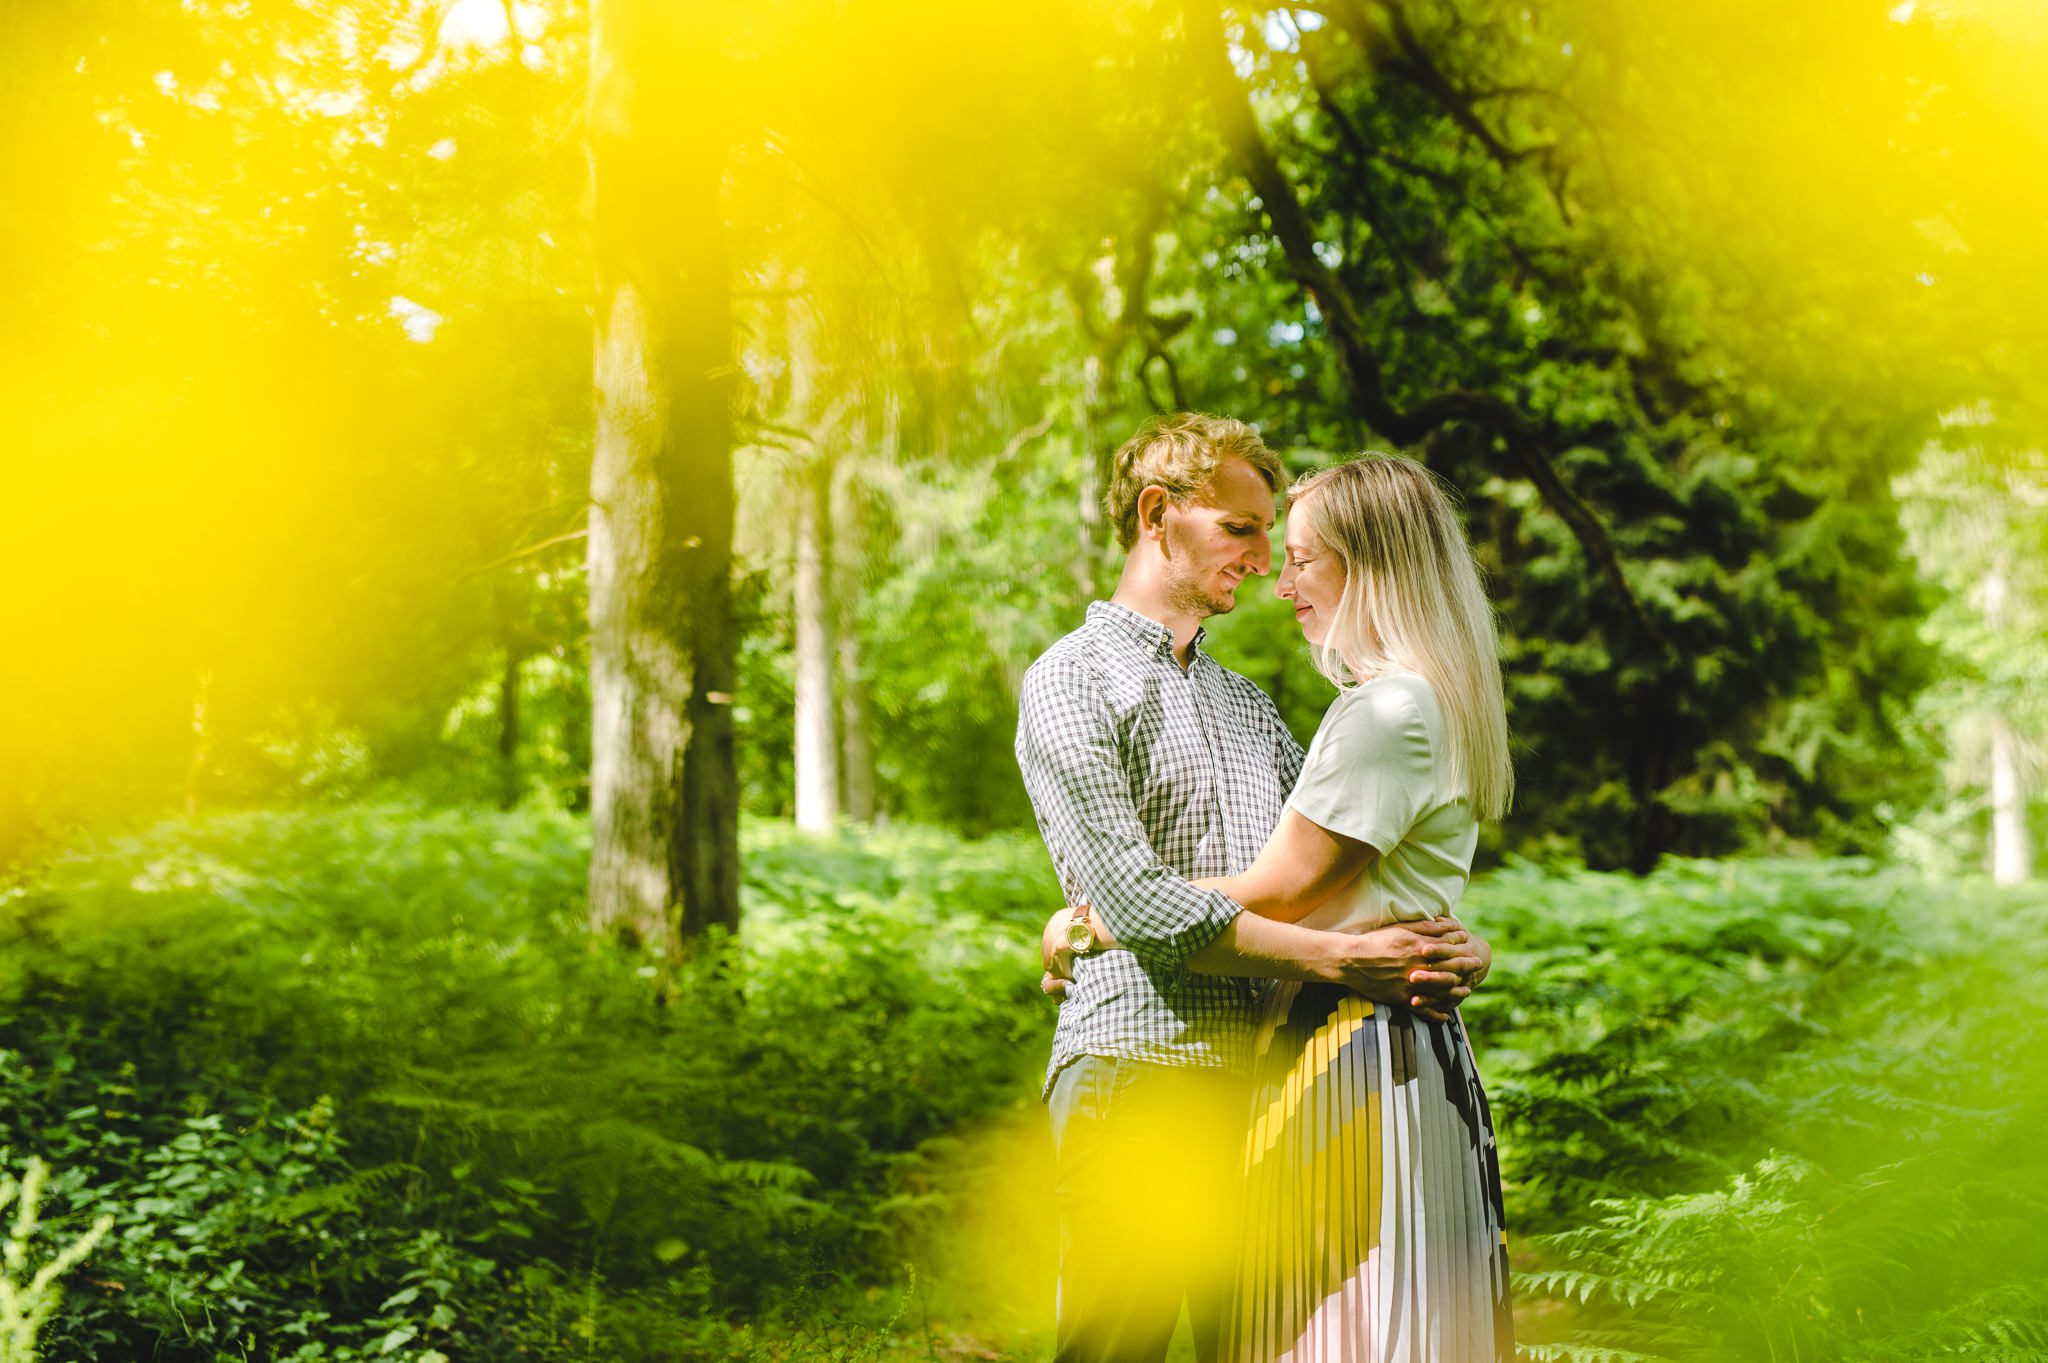 A yellowy pictures shot through flowers of a couple looking at each other